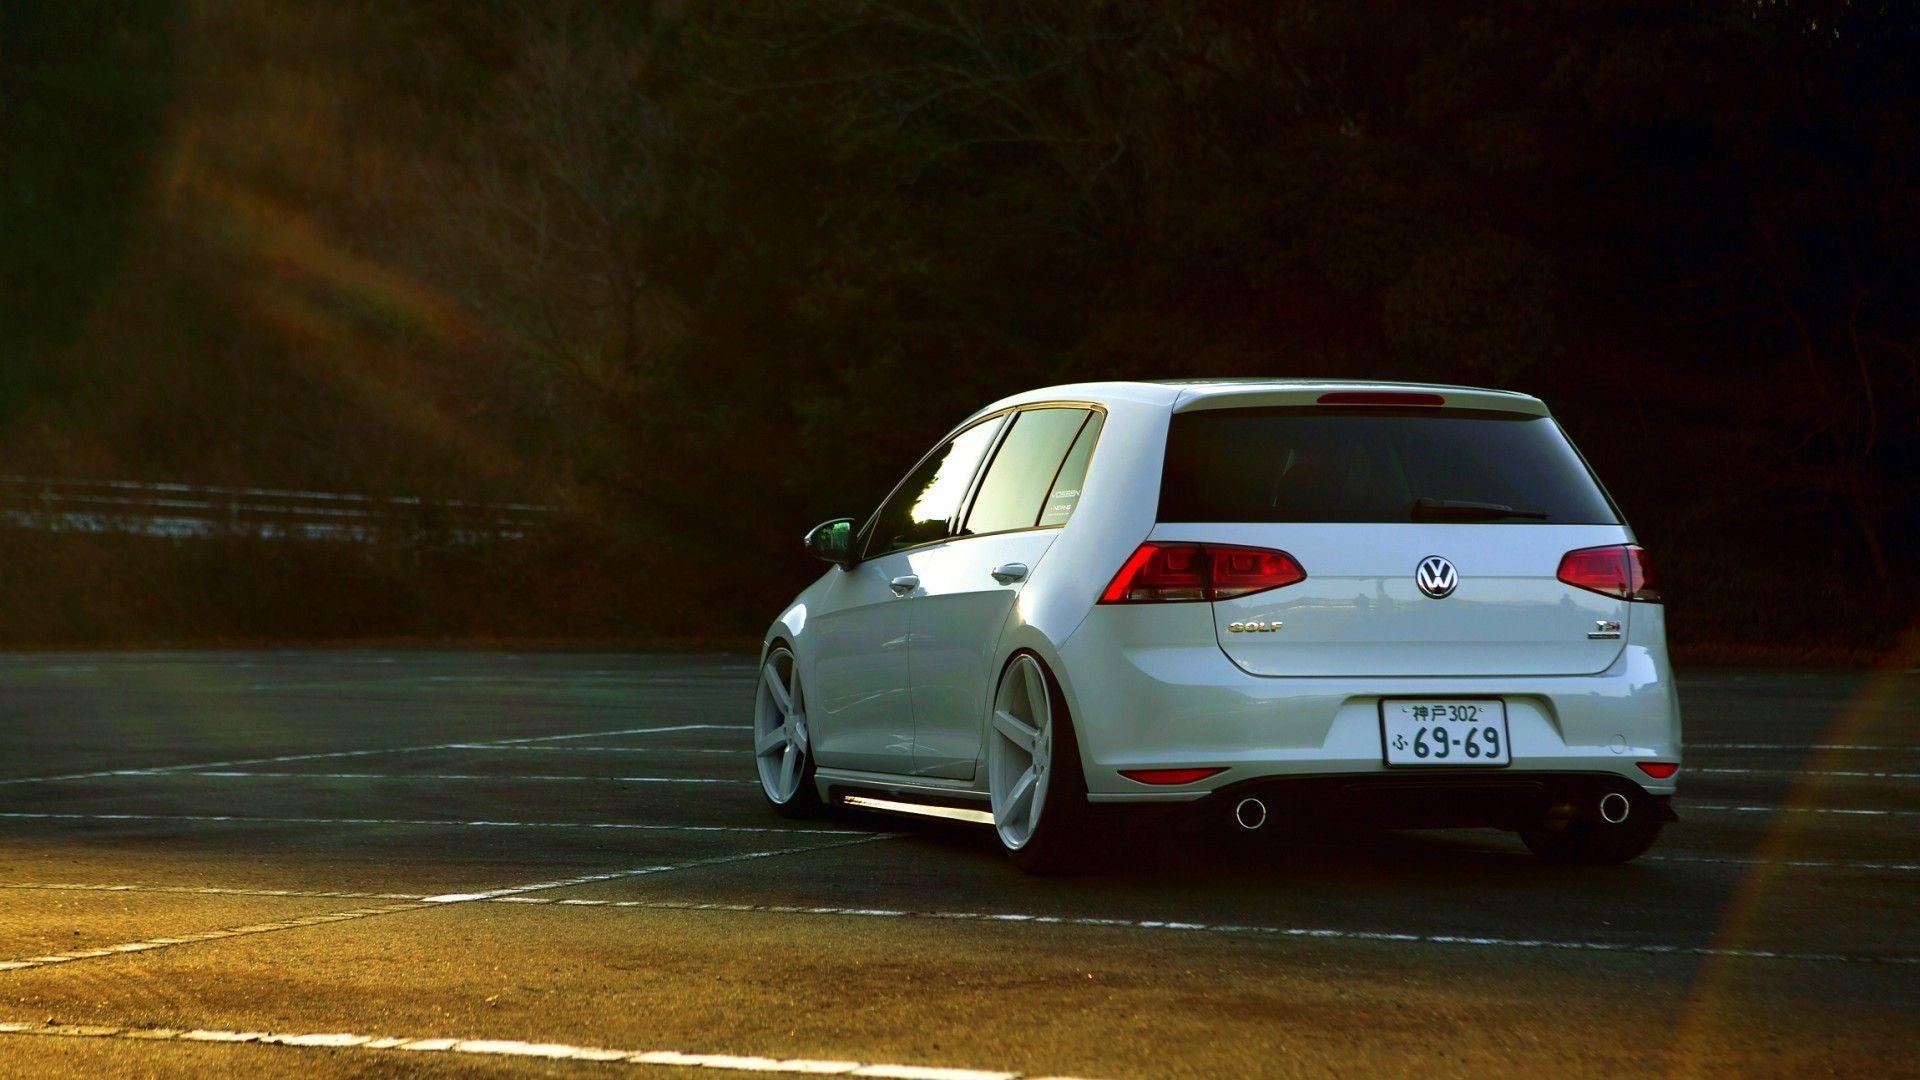 Golf golf vii volkswagen car wallpapers and backgrounds